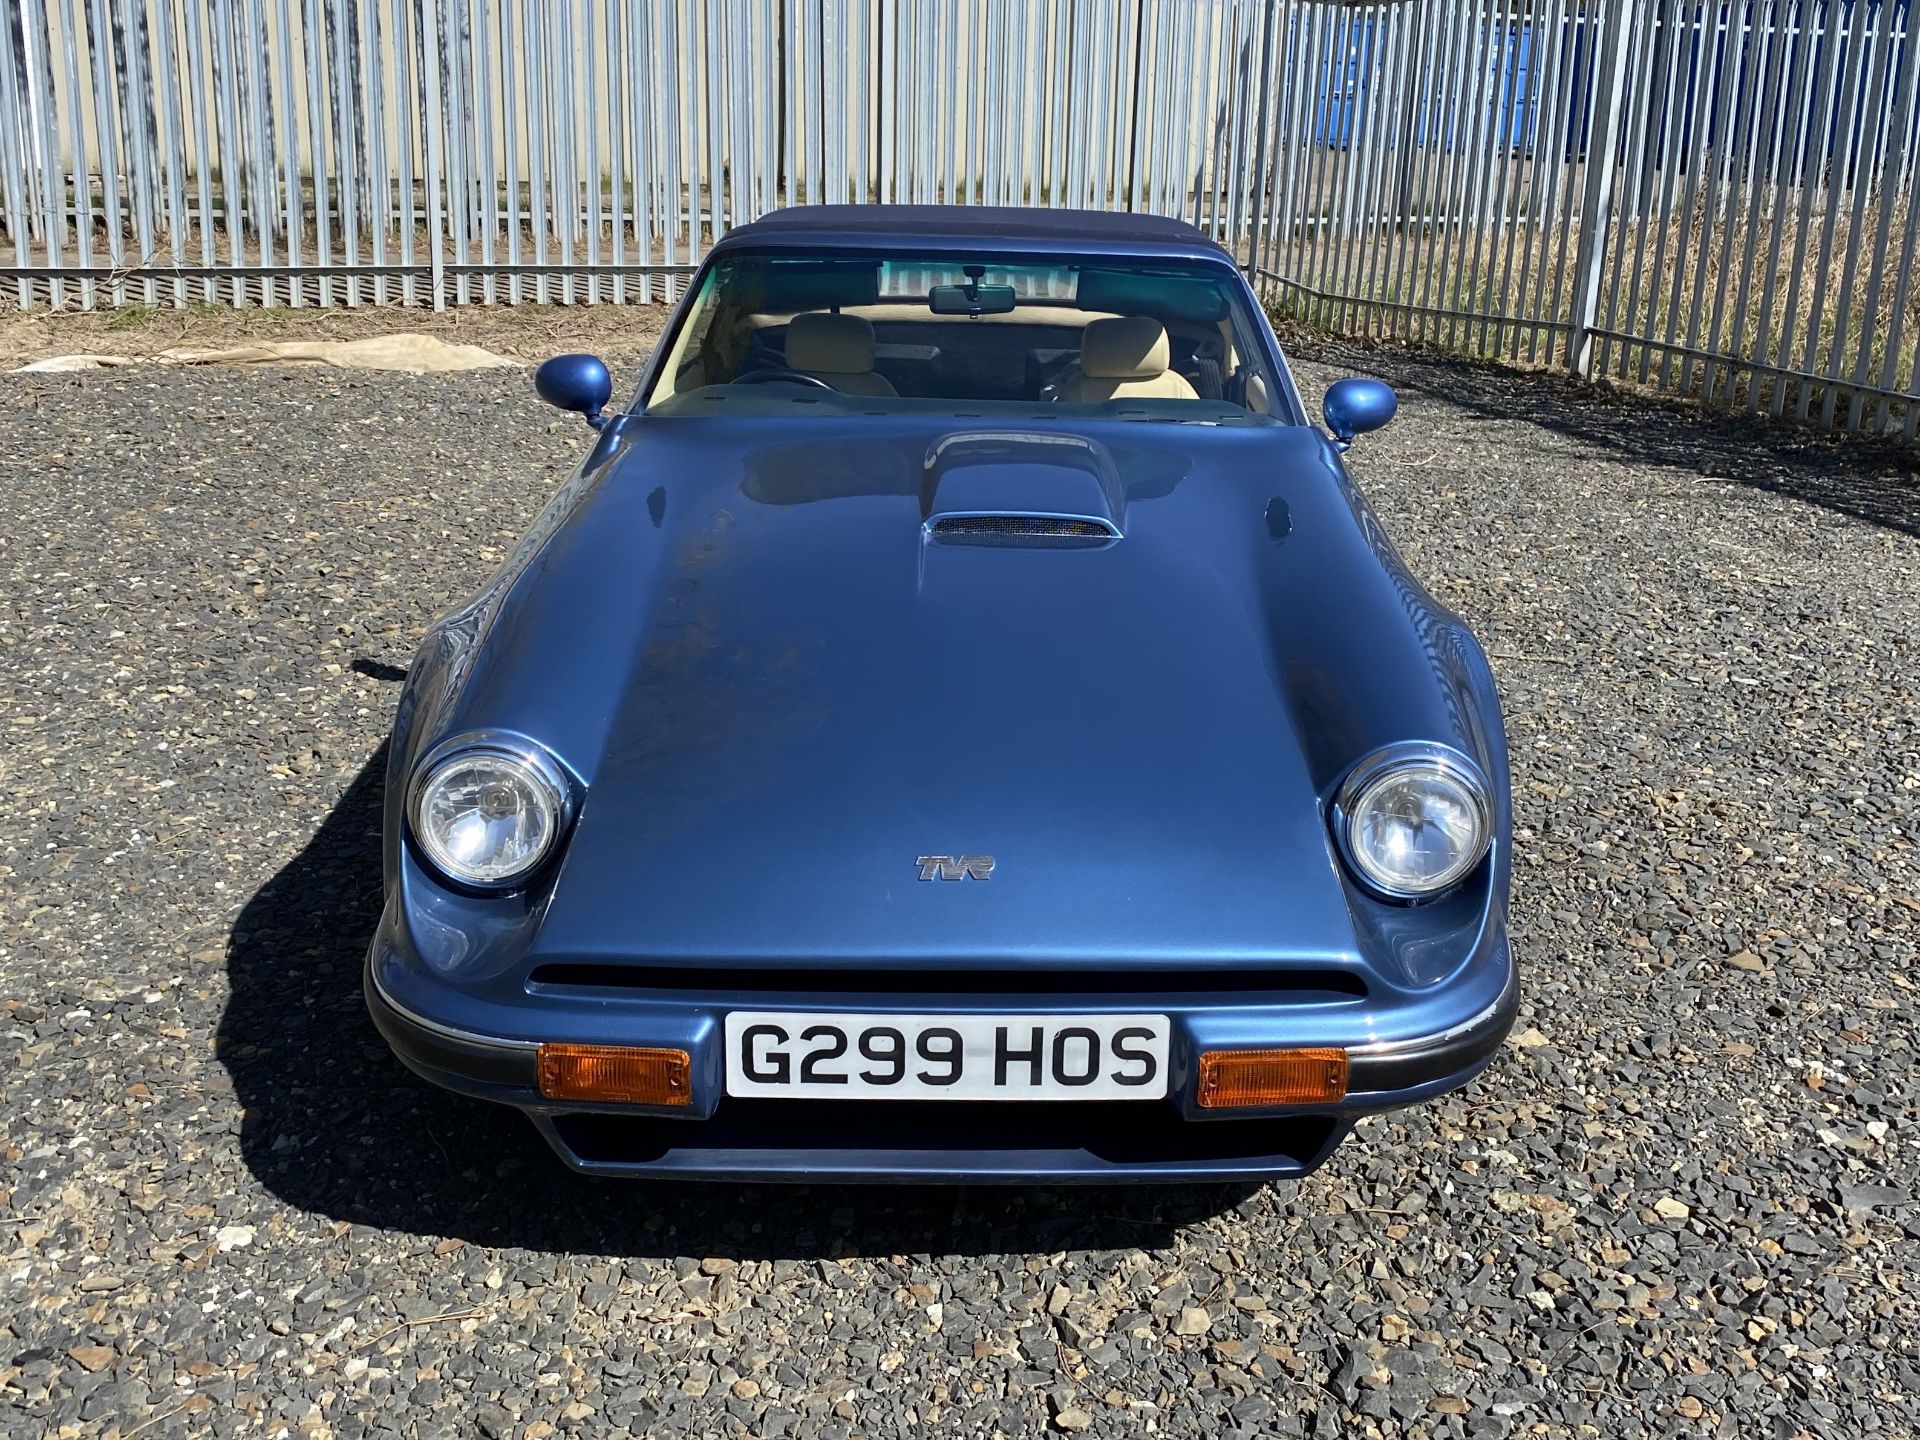 TVR S2 - Image 46 of 60